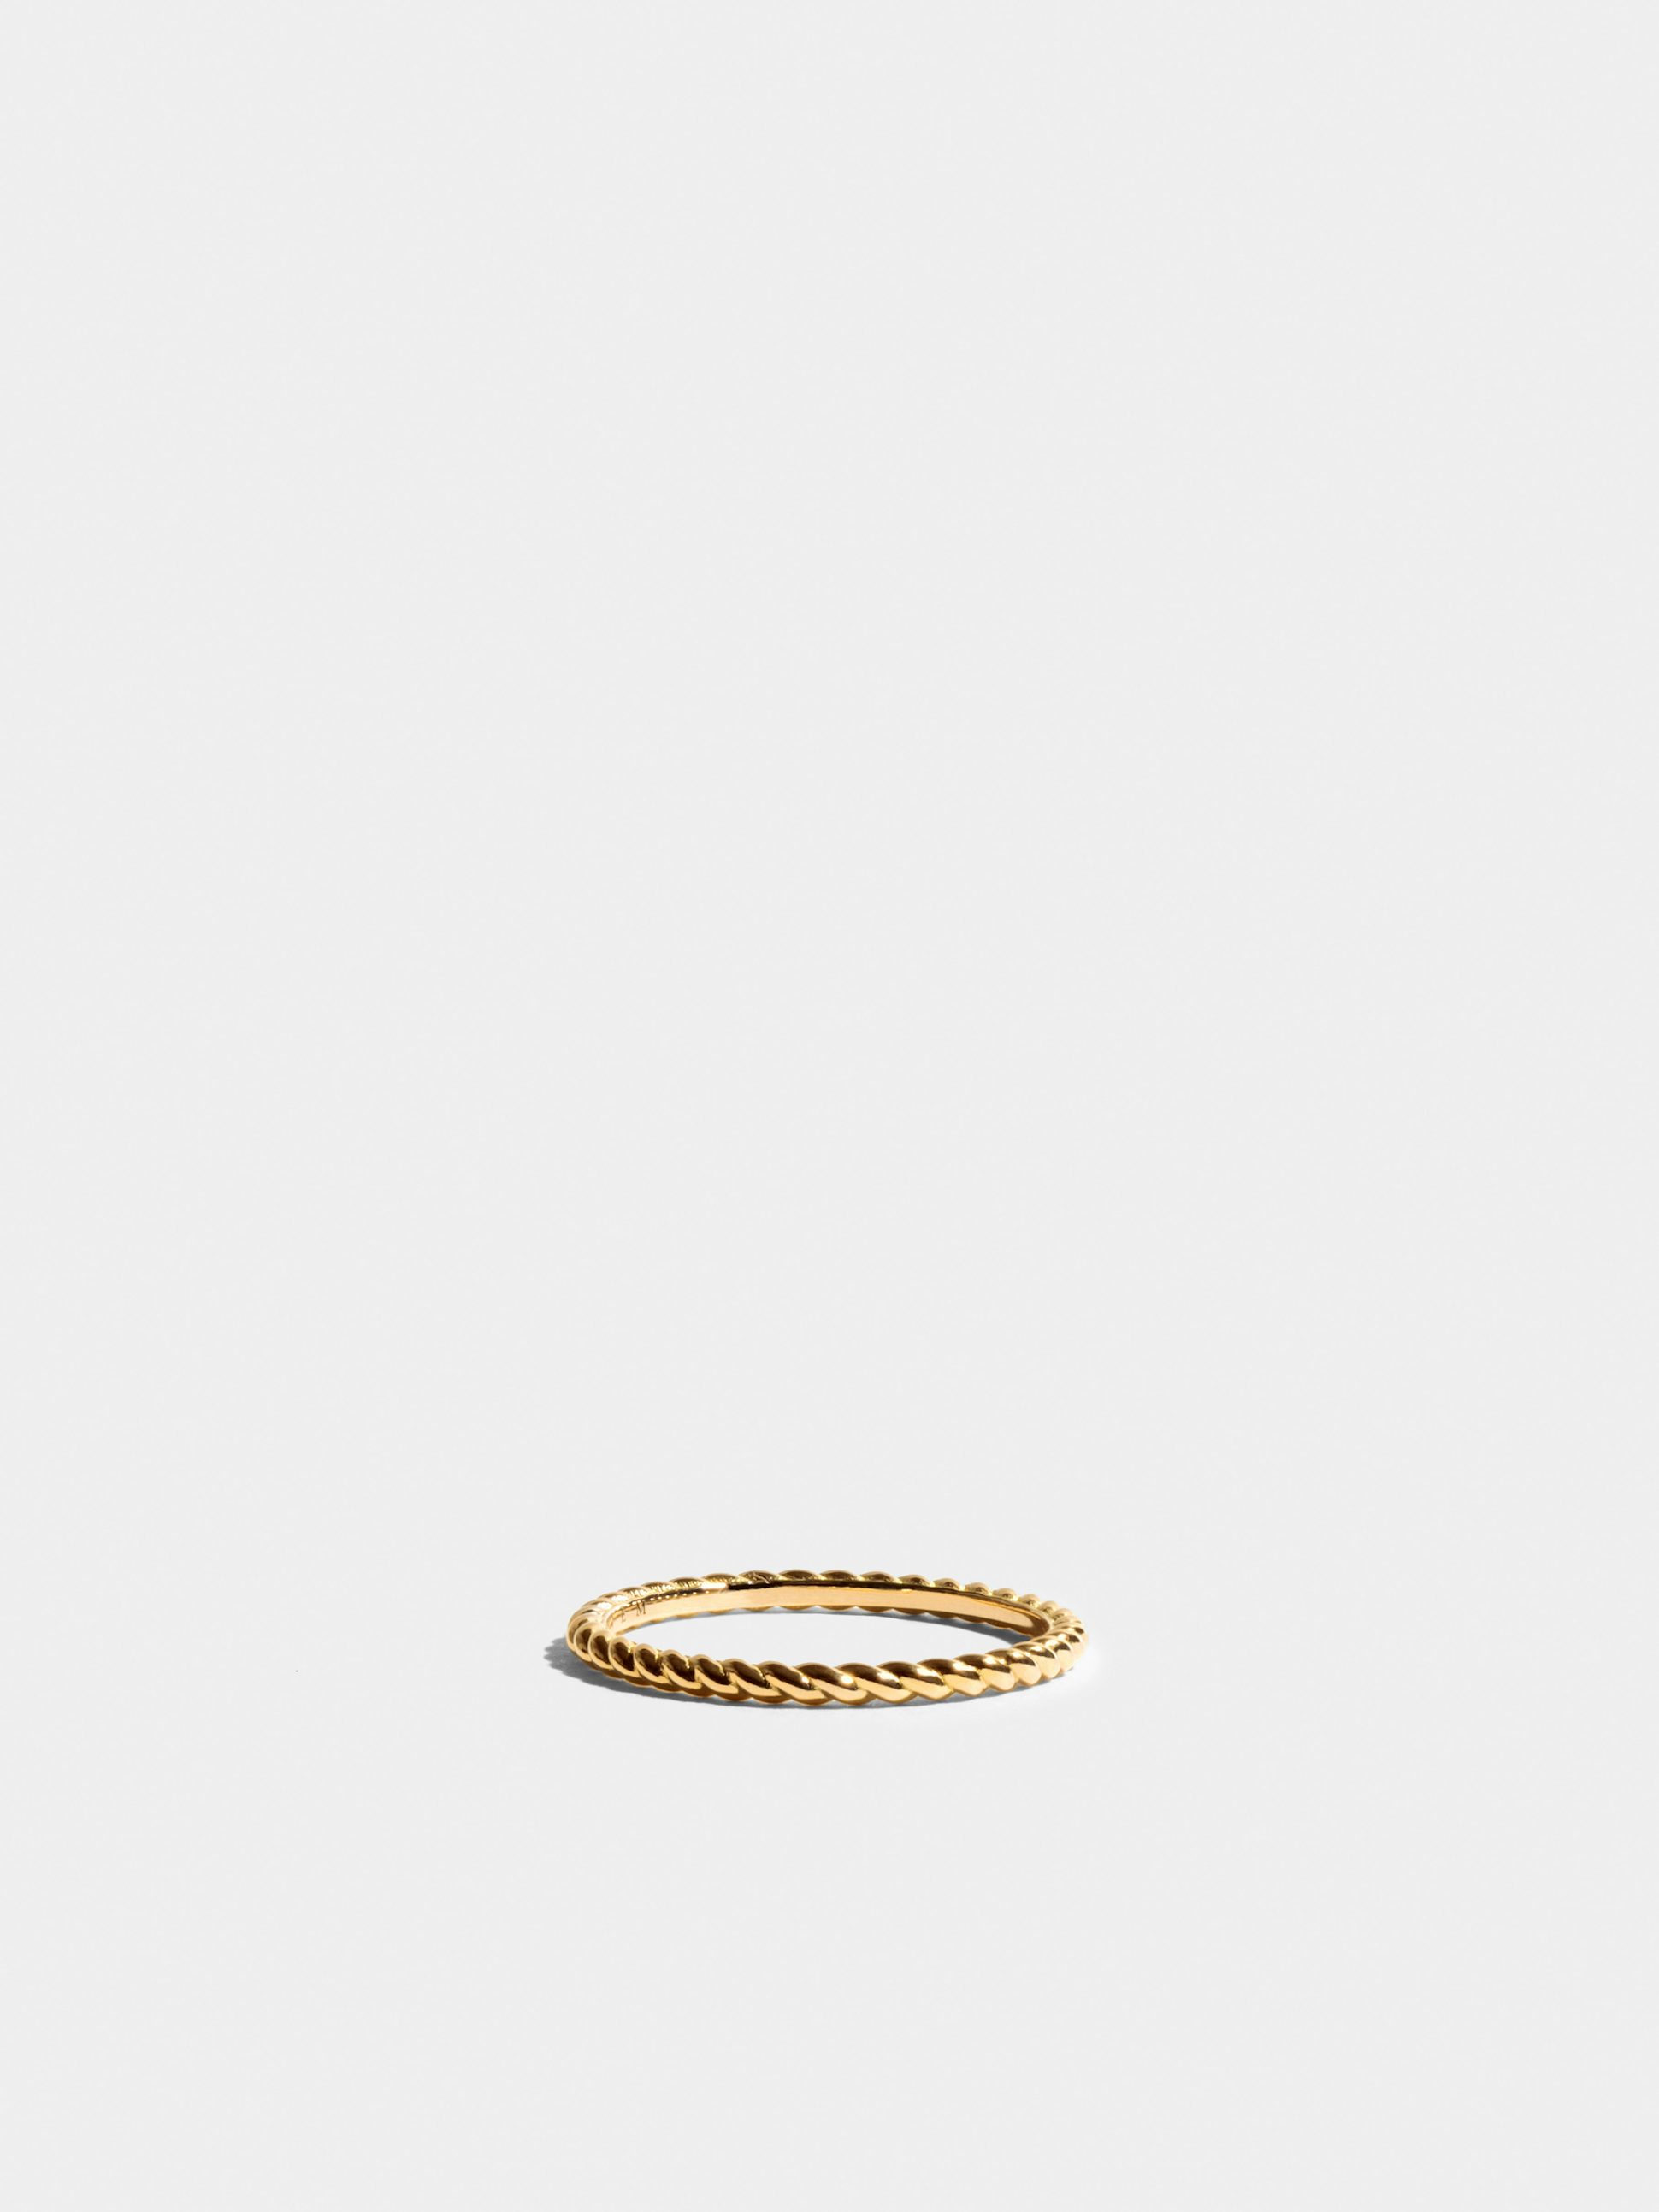 Anagramme twisted ring in 18k Fairmined ethical yellow gold